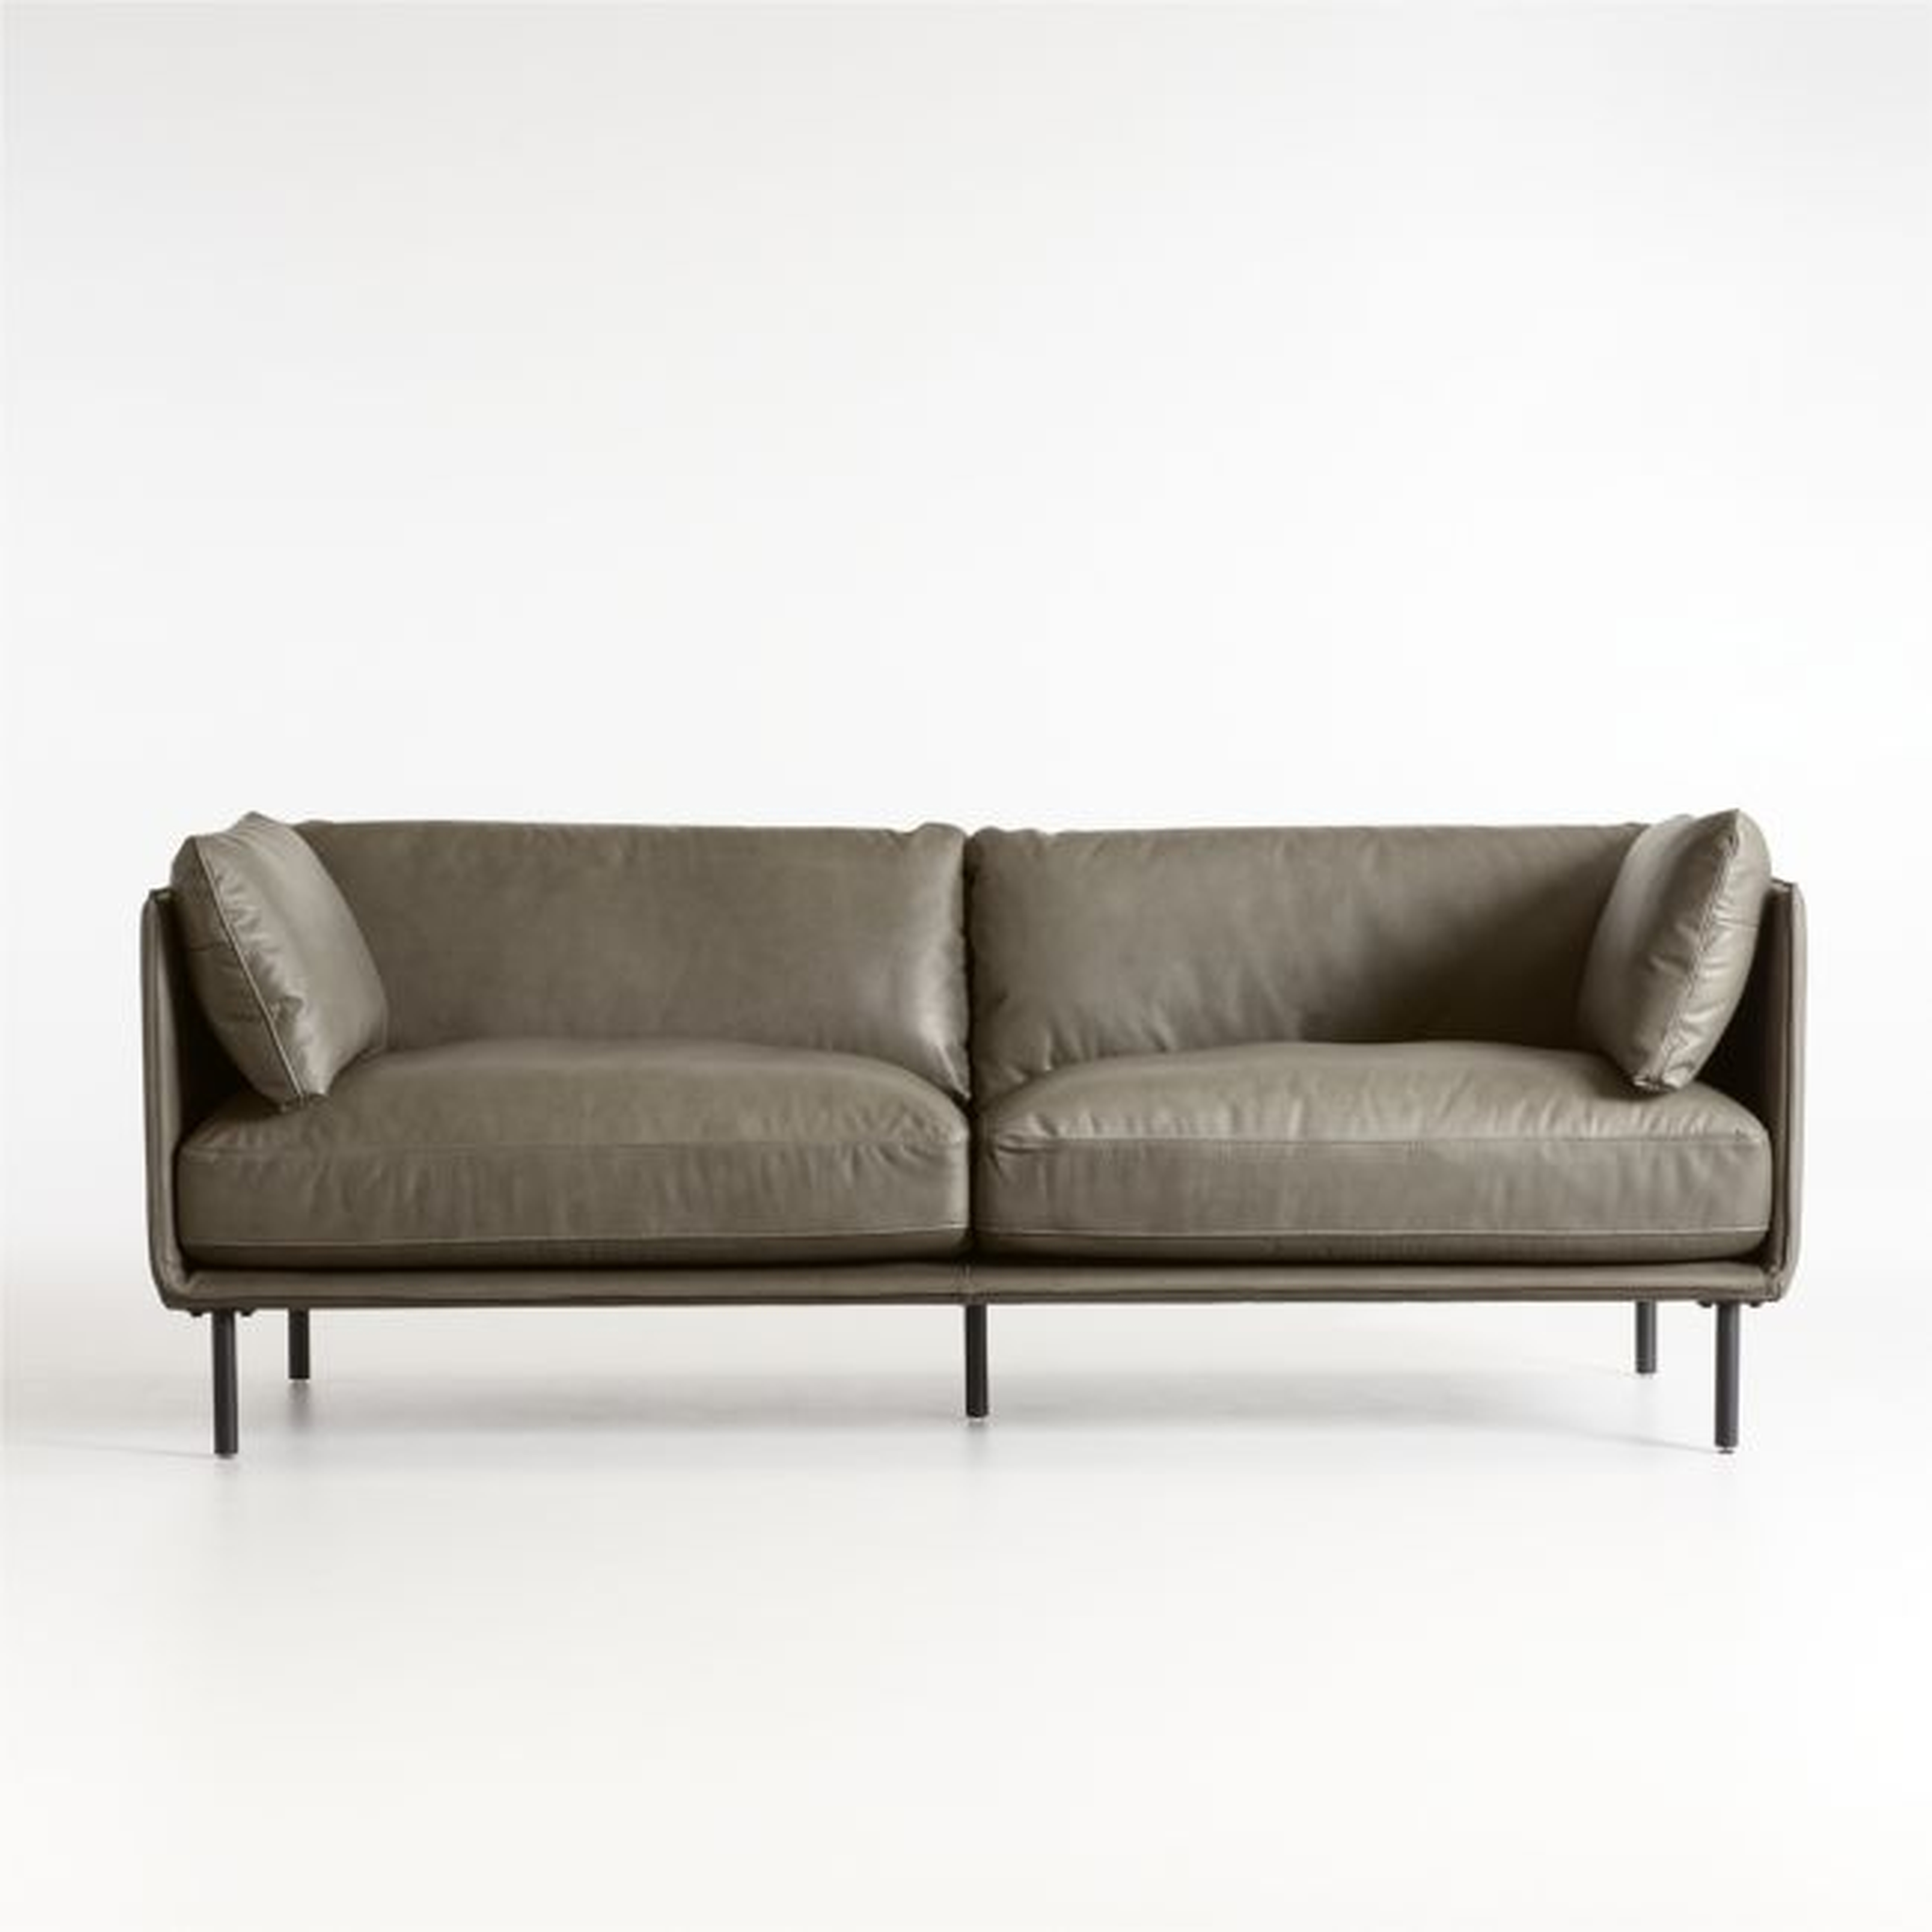 Wells Leather Sofa - Crate and Barrel